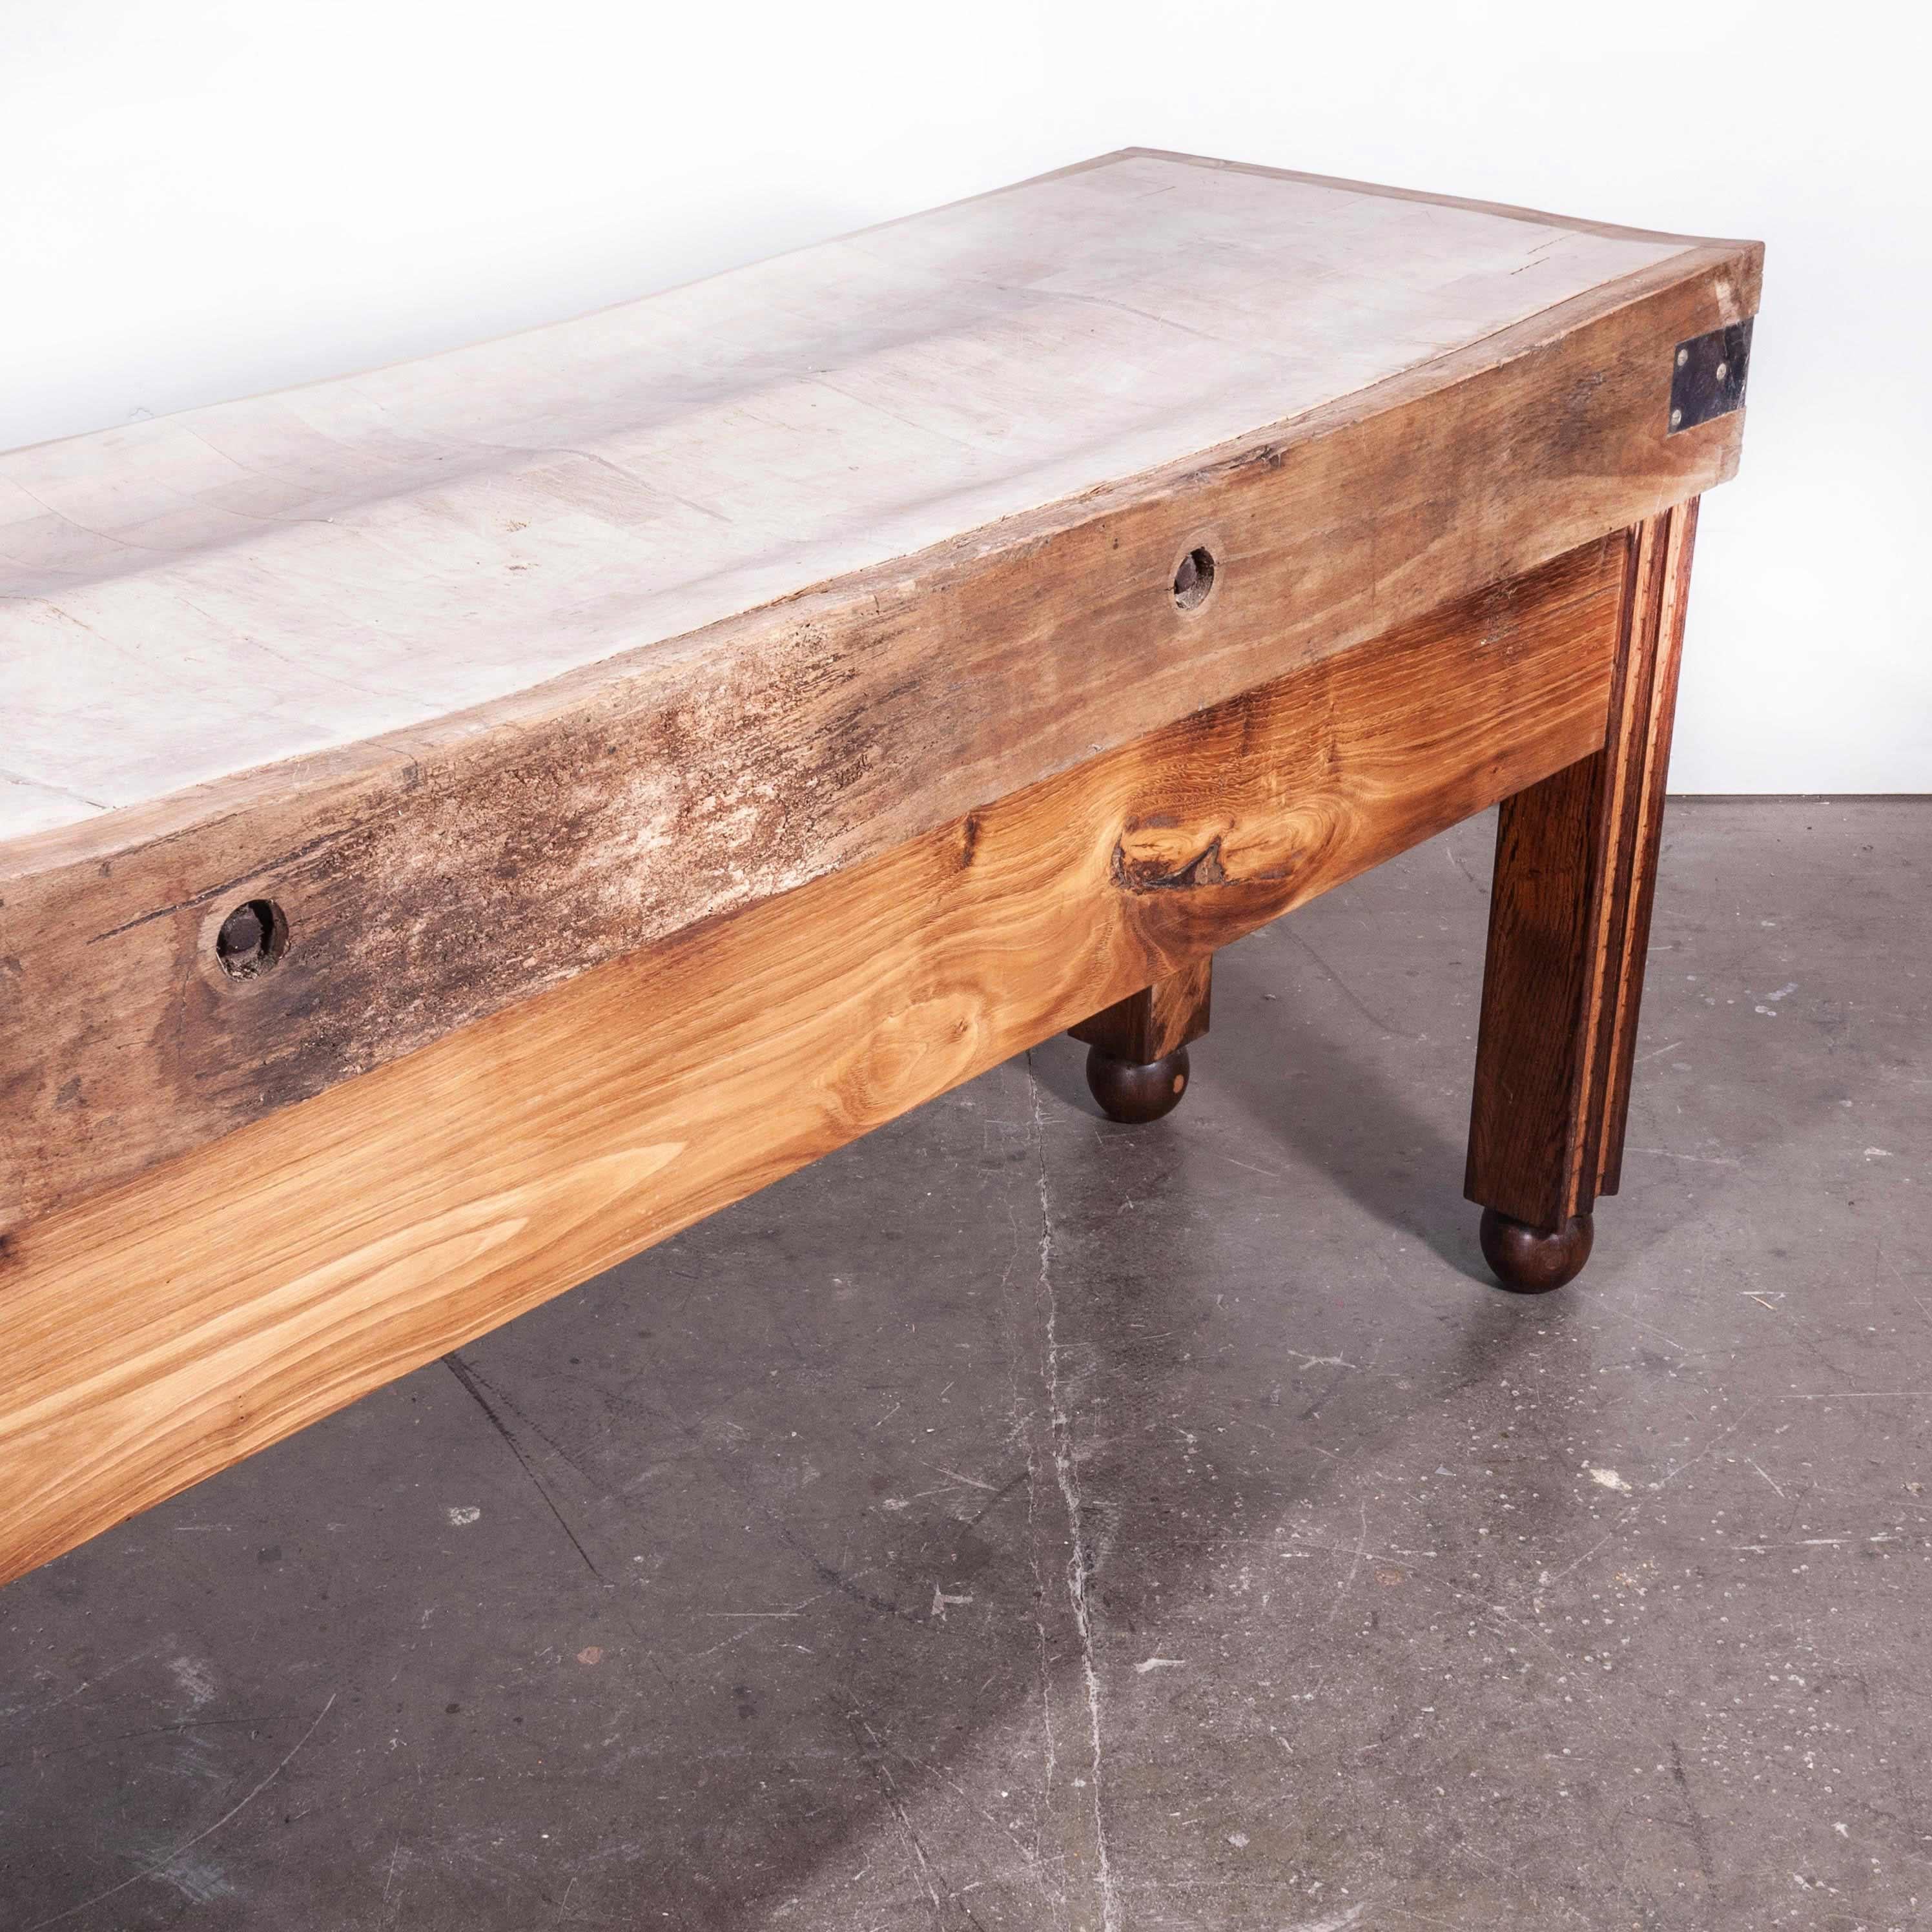 1950s large French oak end grain butchers block
Late 1950s large French oak end grain butchers block. At two metres in length the proportions are excellent. In completely original excellent condition with a large drawer and heavy brass handle. The